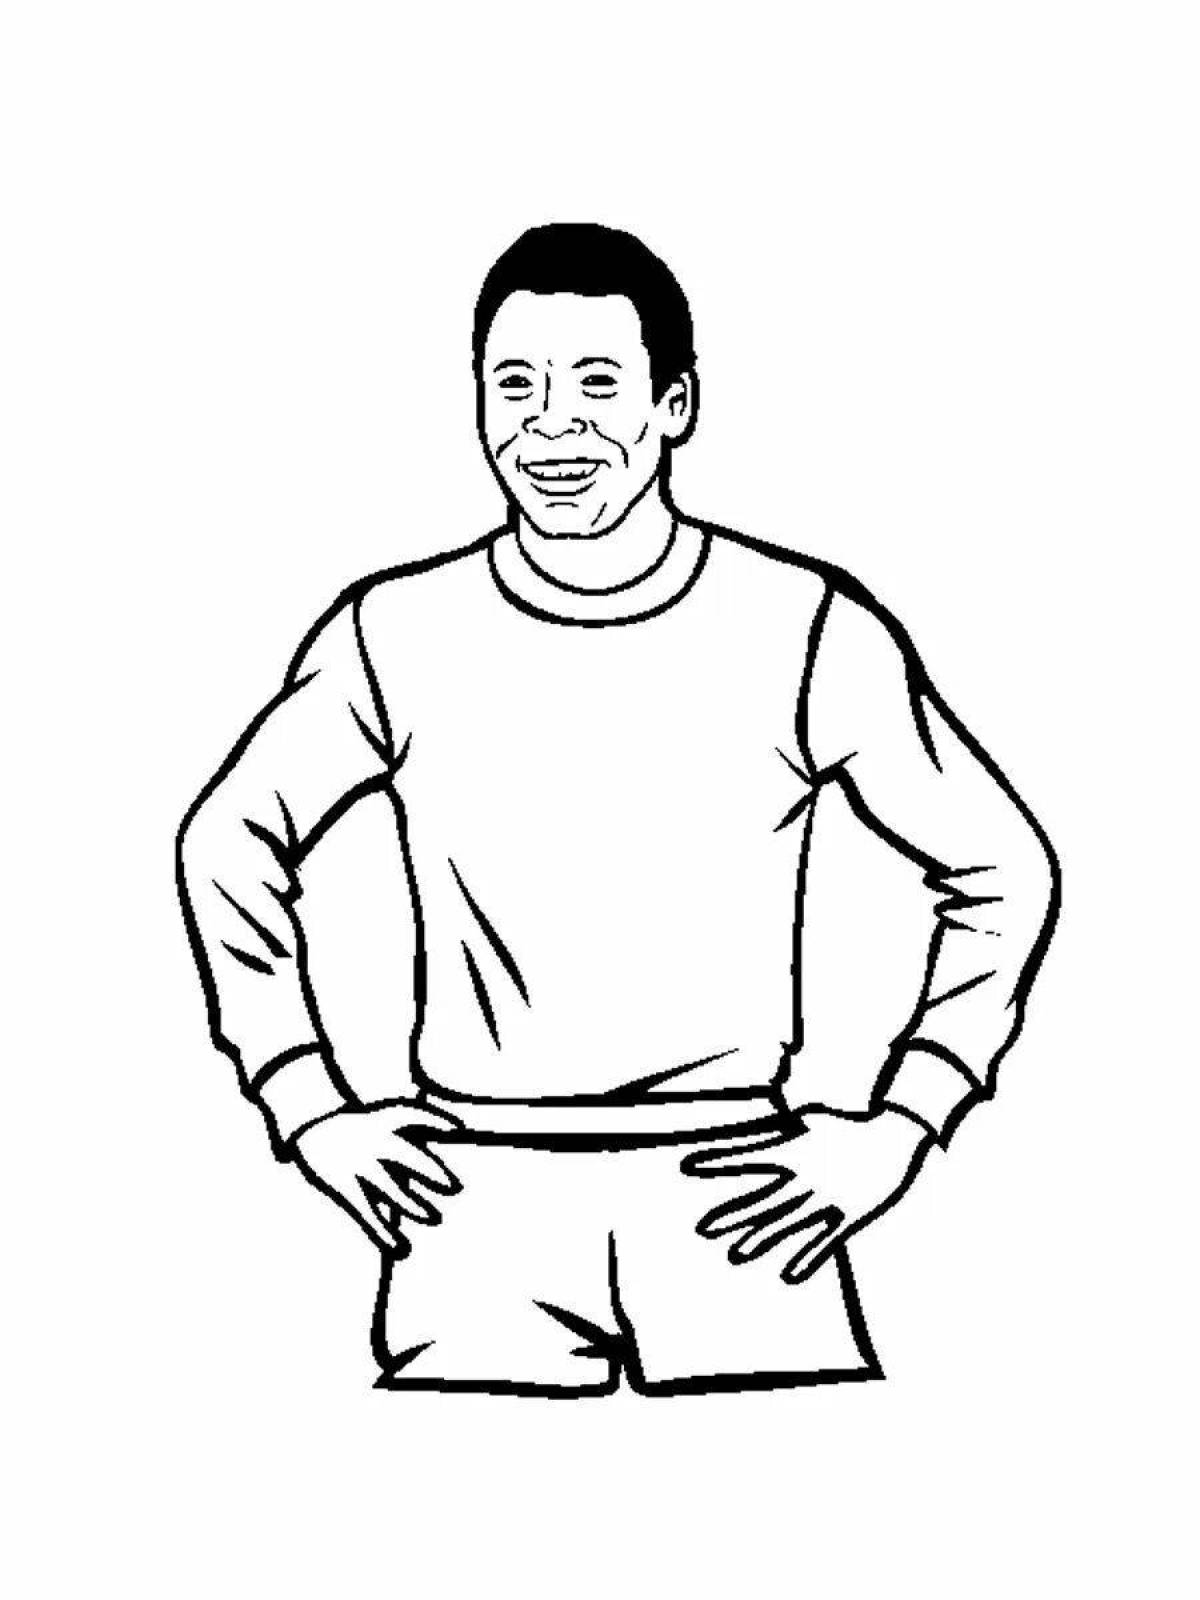 Pele's colorful football coloring page